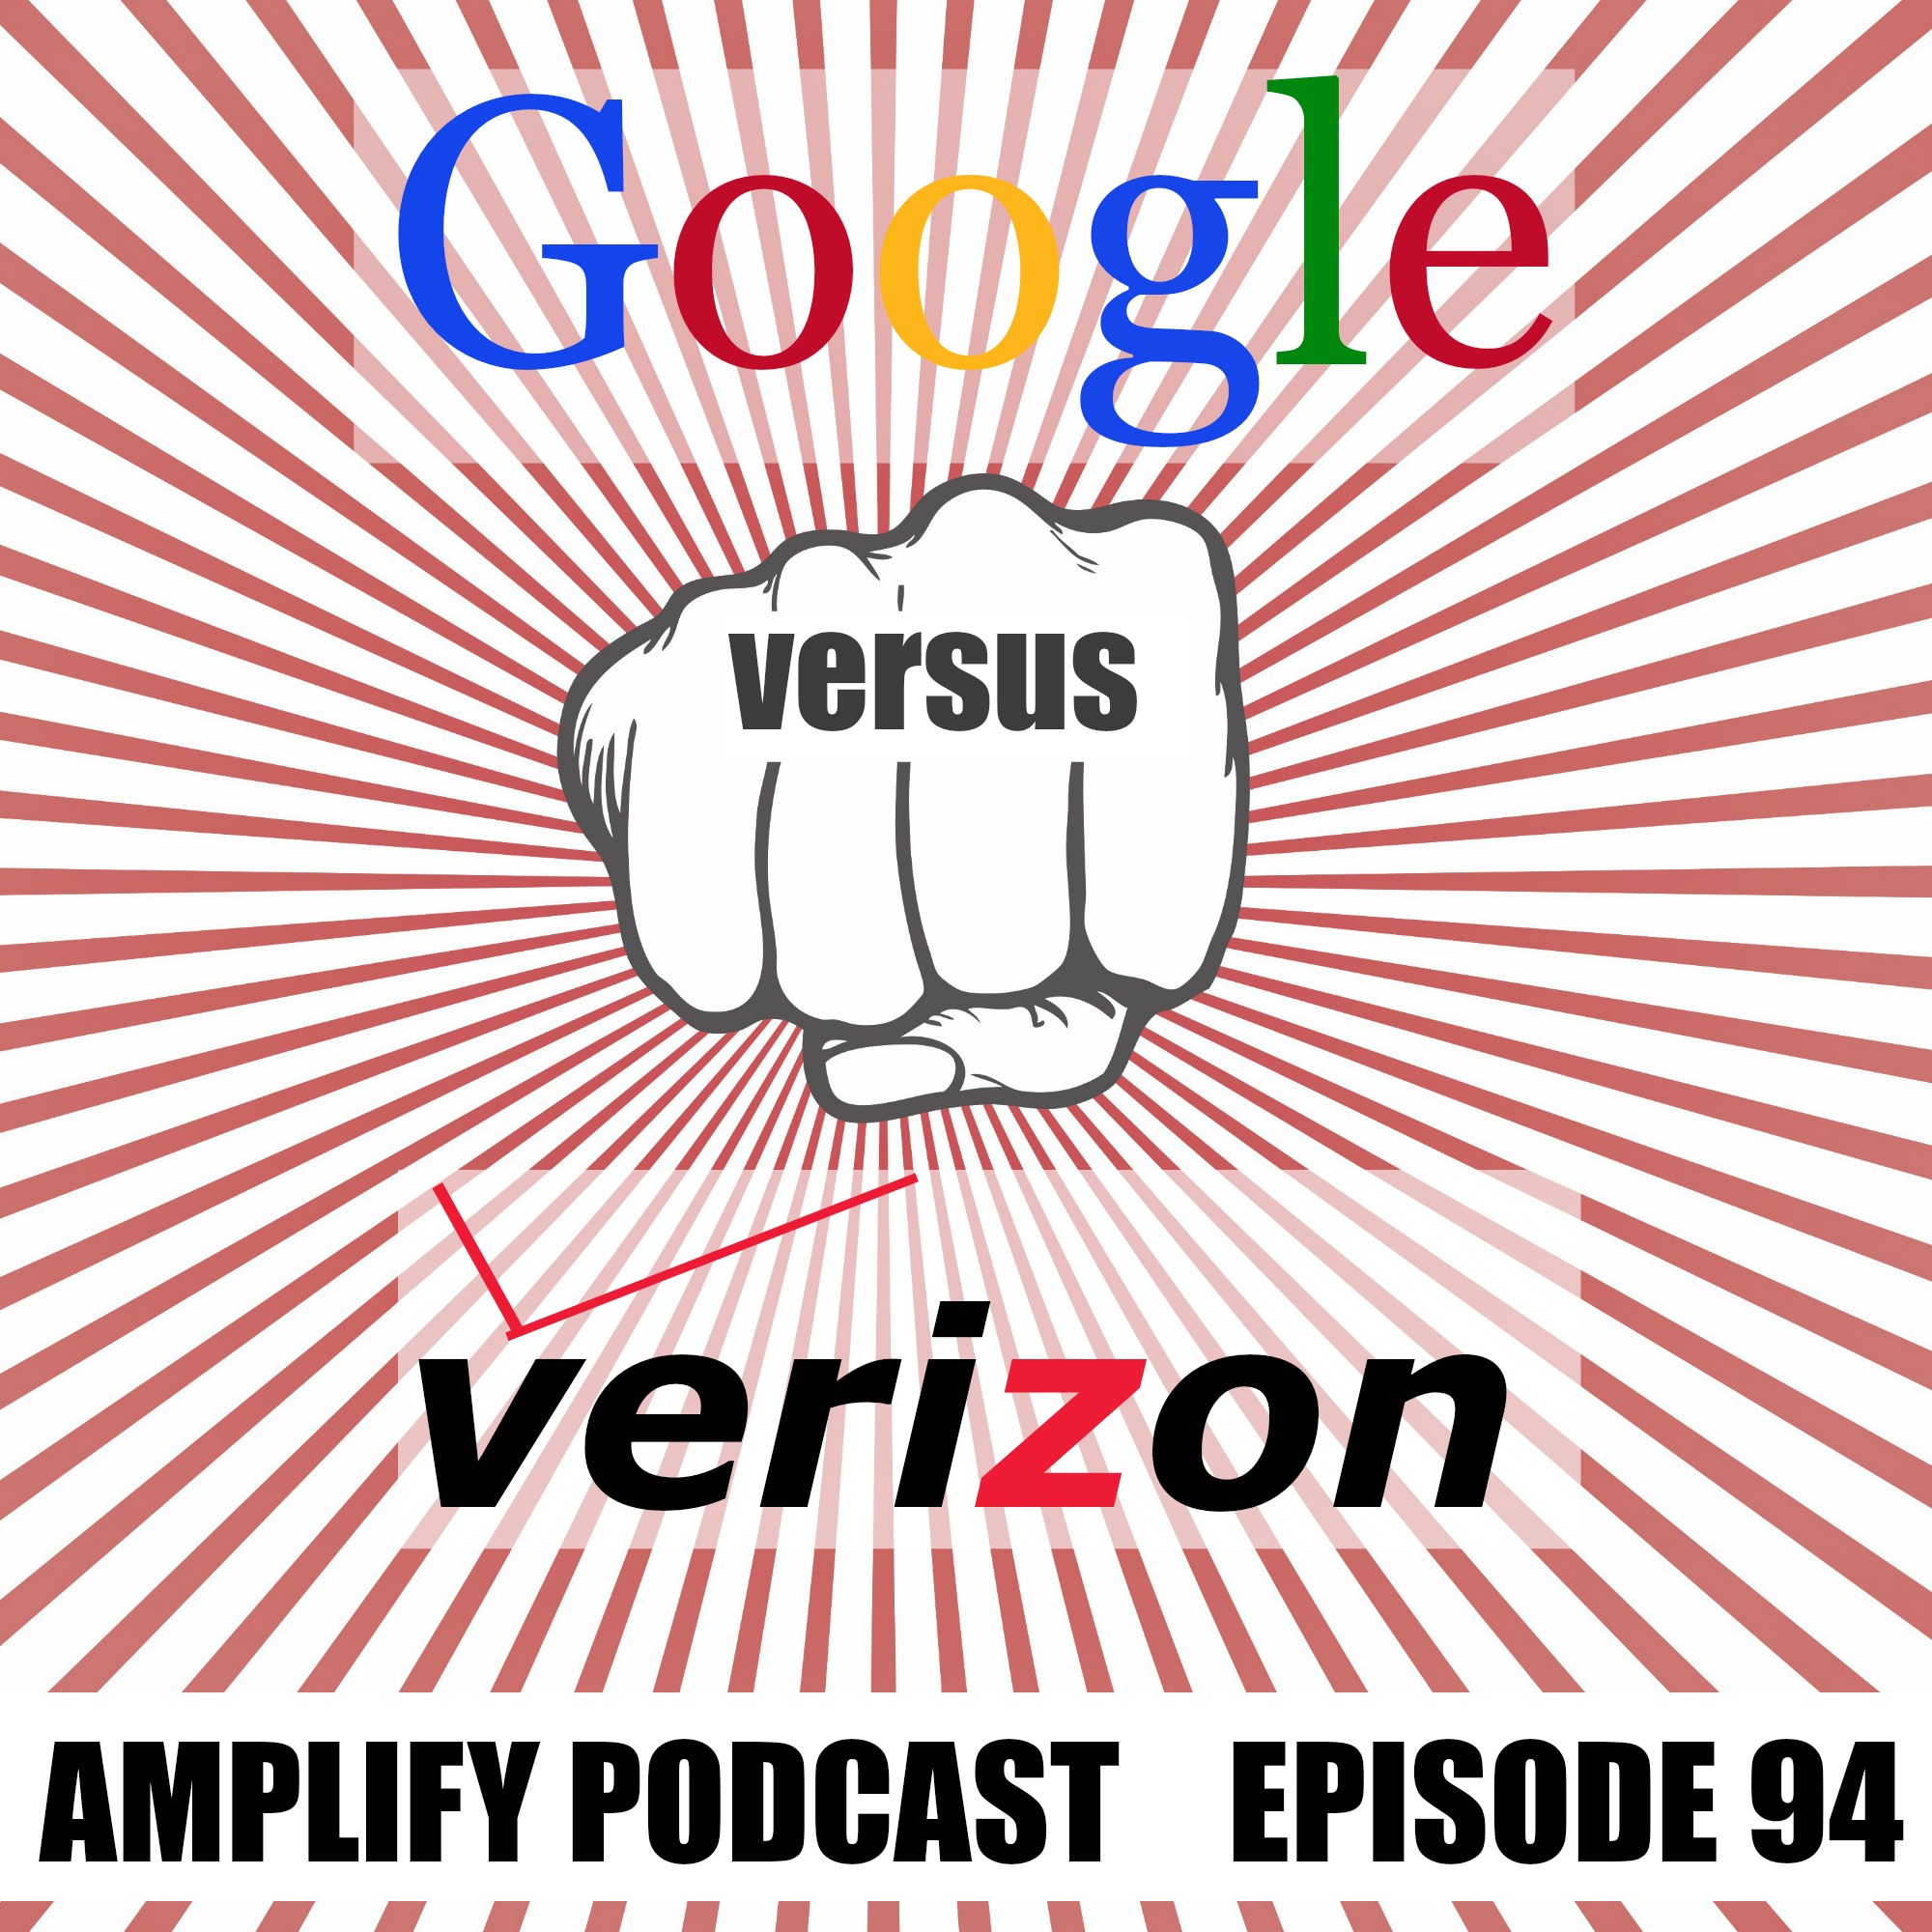 You are currently viewing Can Verizon Topple Google?